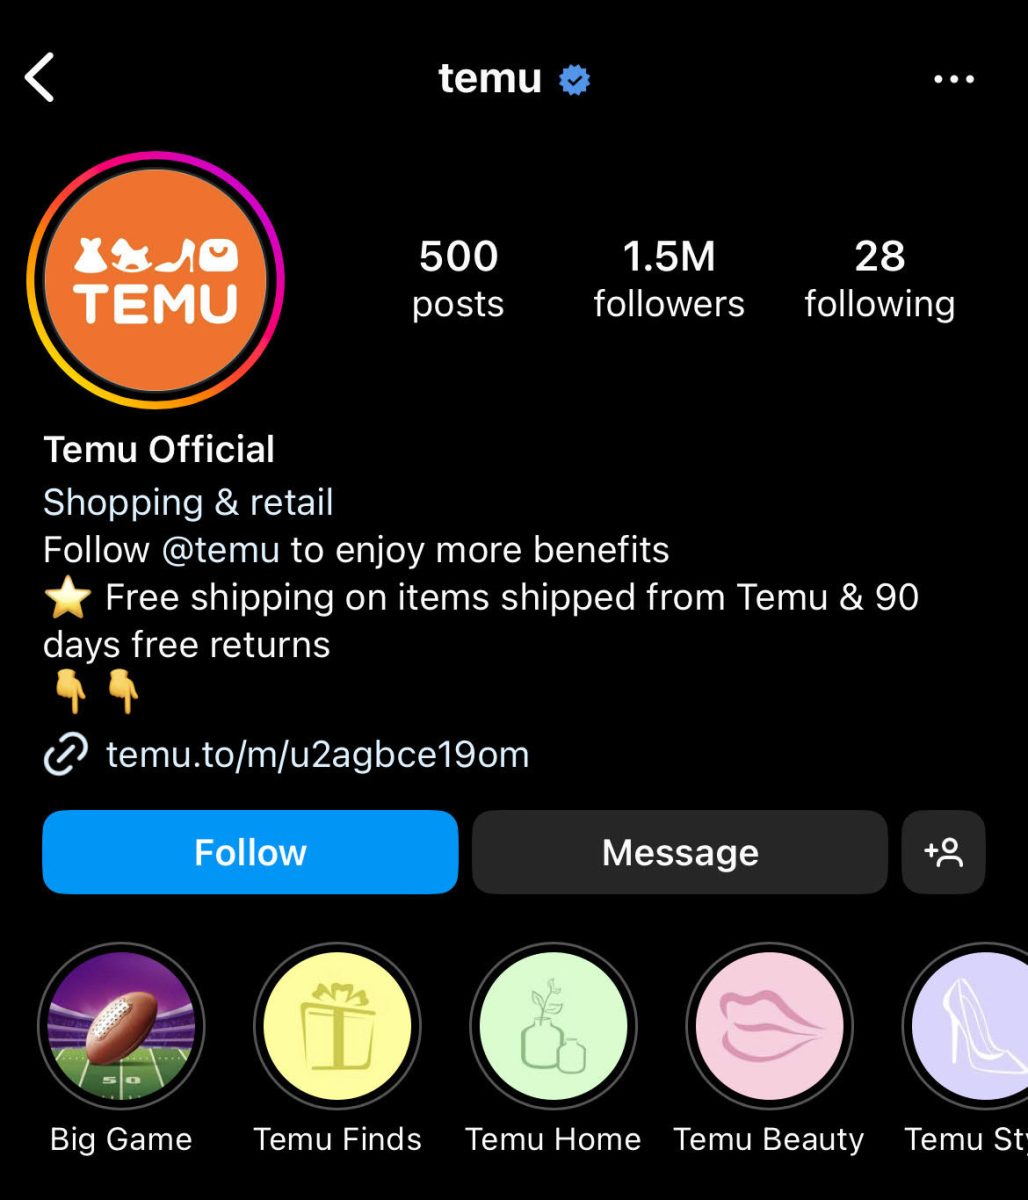 Temu+advertises+their+free+shipping+and+90+day+free+return+policies.+Screenshot+from%3A+%40temu+on+Instagram%0A